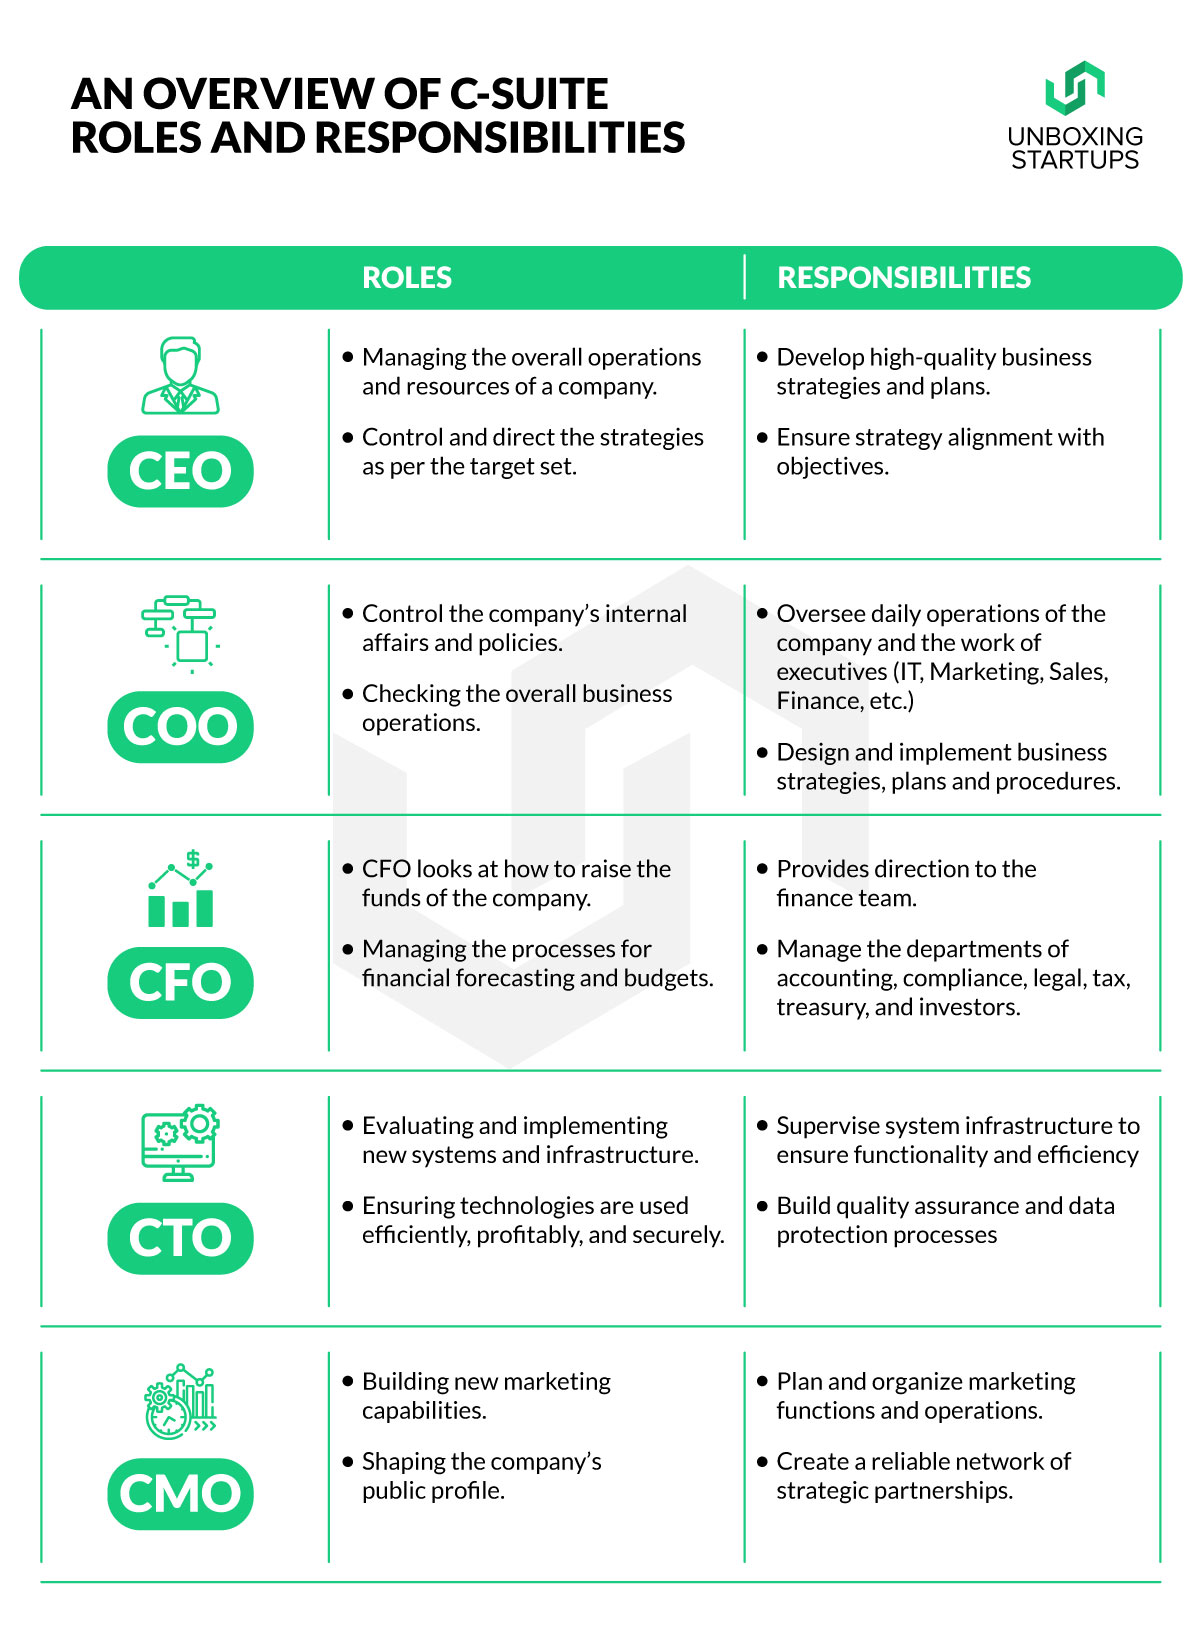 c-suite roles and responsibilities